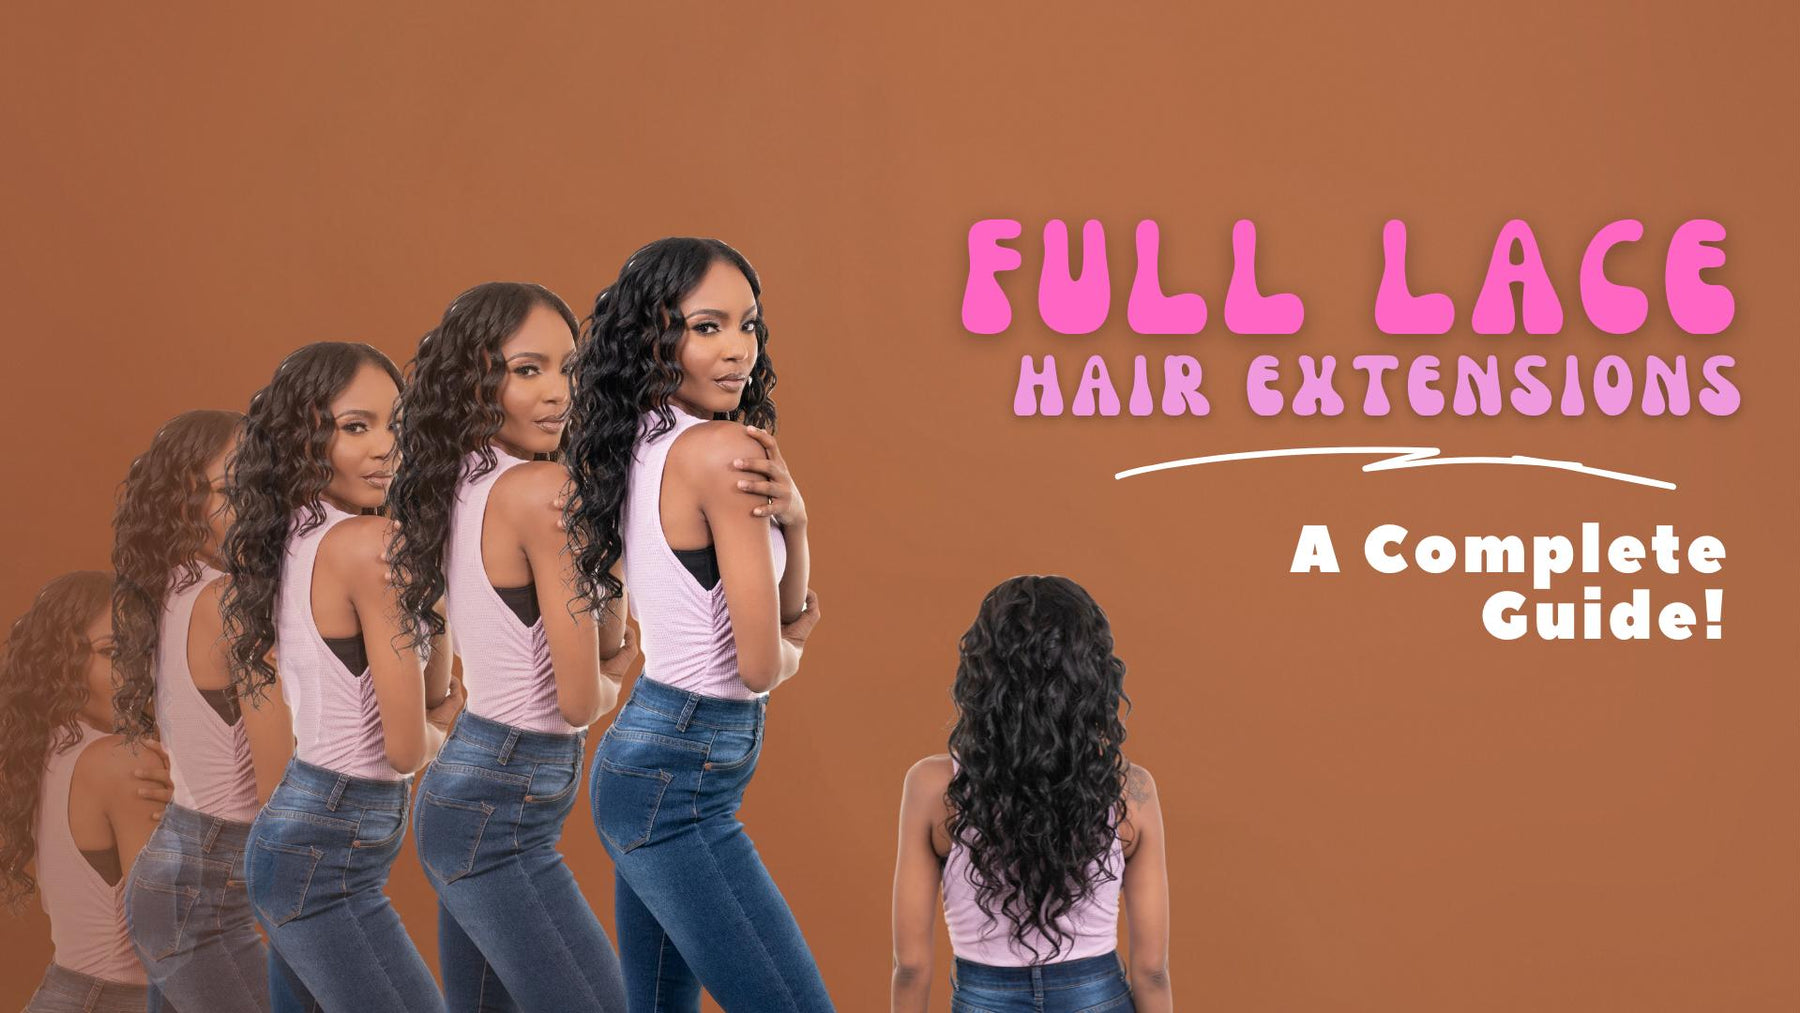 Full Lace Hair Extensions